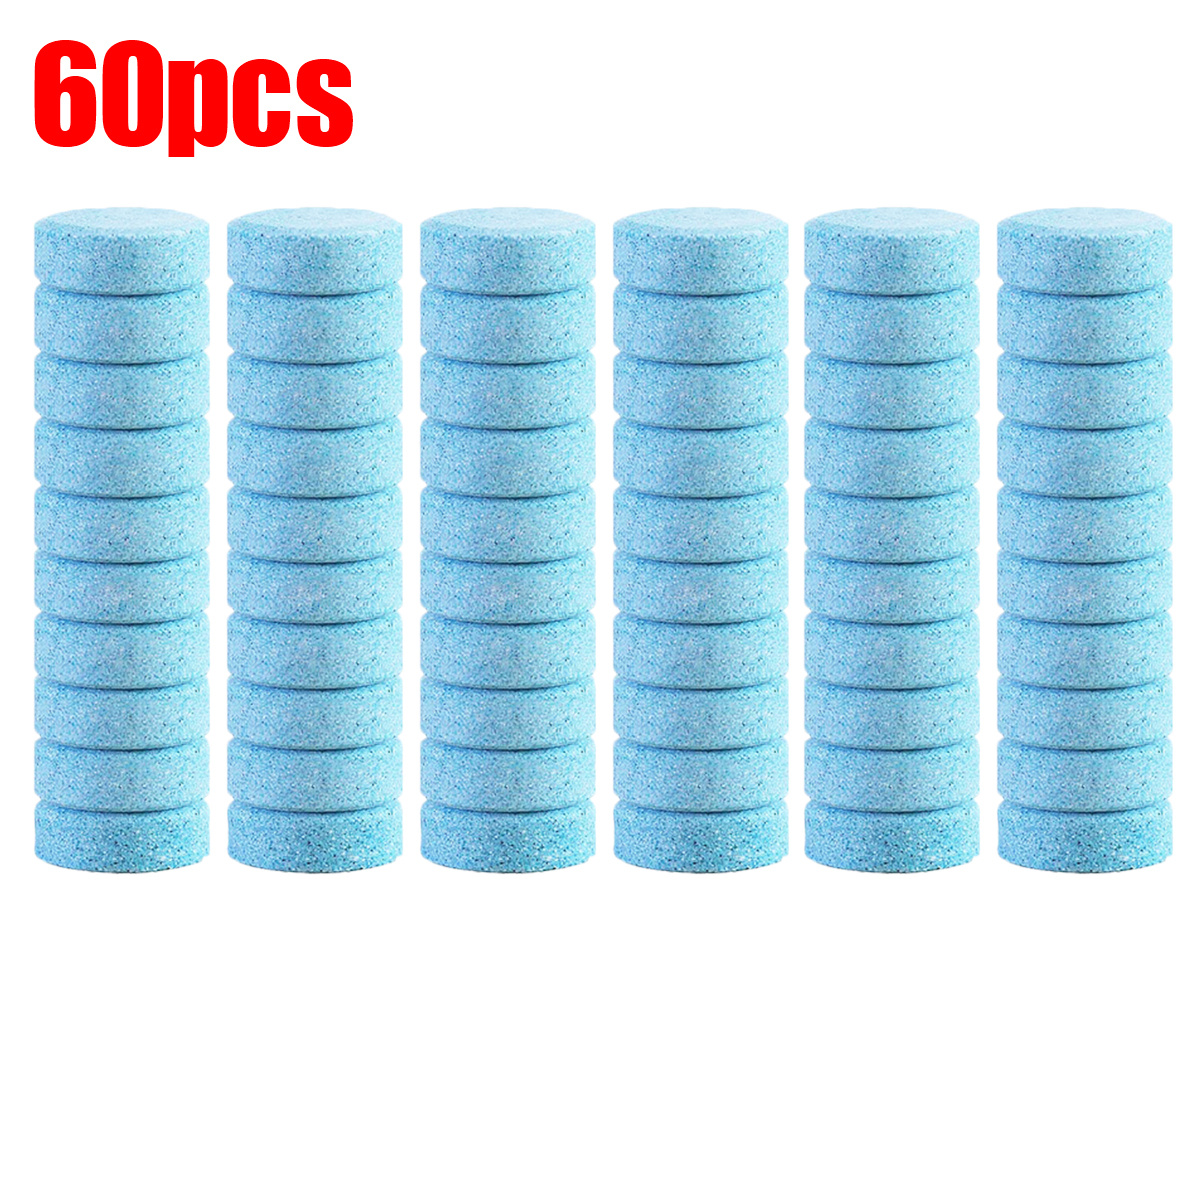 60 Pcs Car Windshield Glass Concentrated Clean Washer Tablets,  Multifunctional Effervescent Spray Cleaner Cleaning Tool, Window Cleaner 